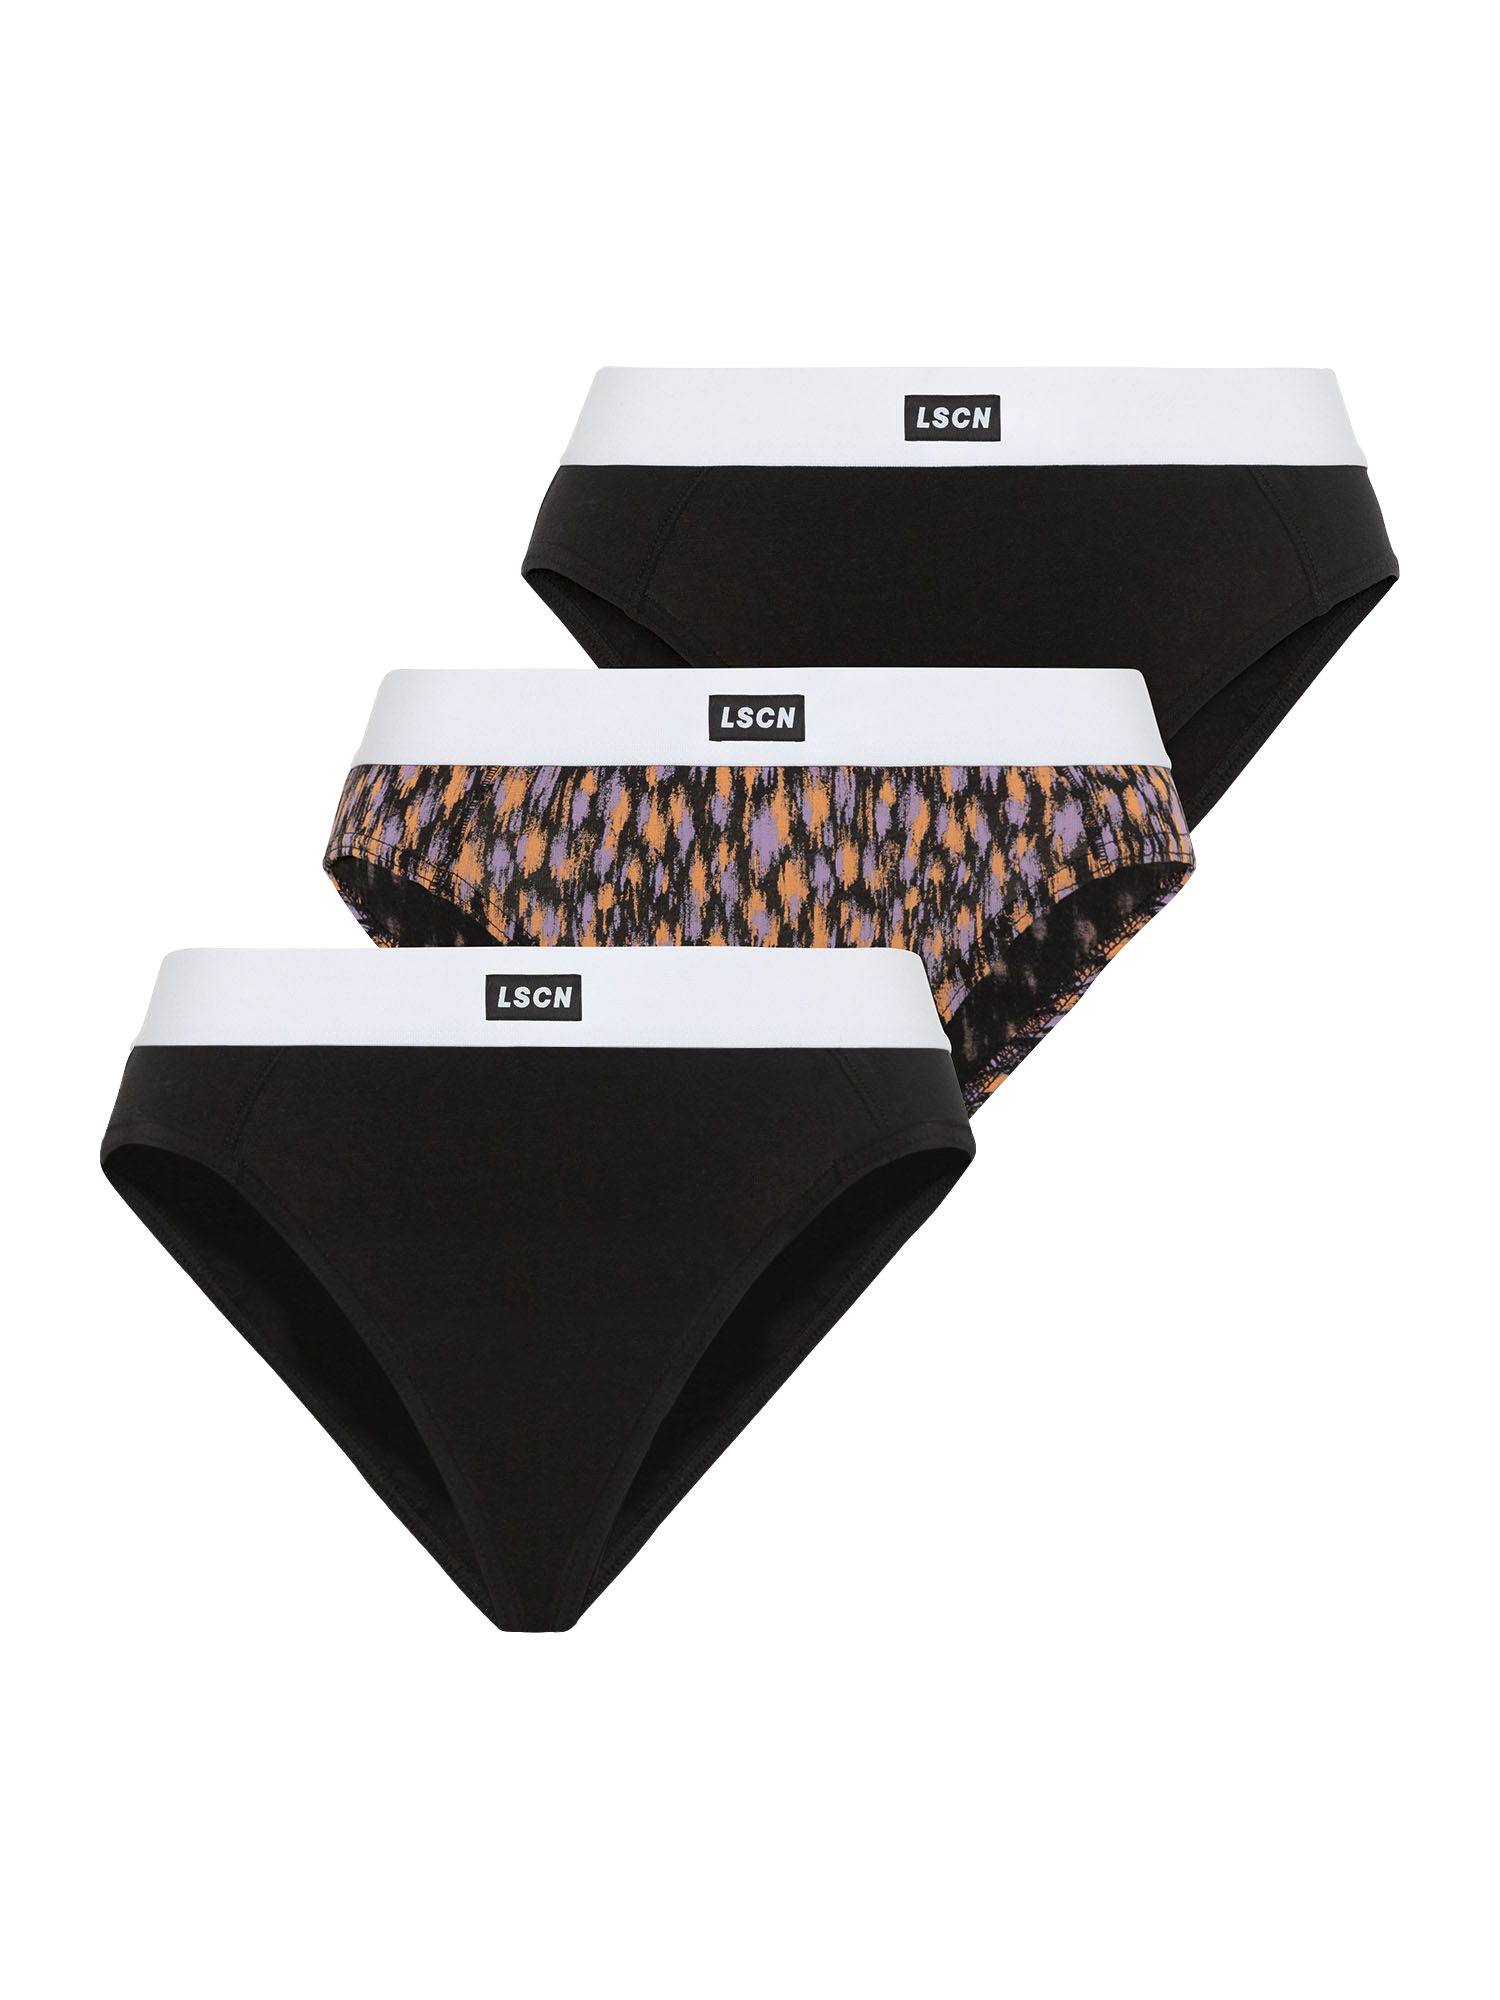 LSCN by LASCANA Jazz-Pants Slips, (Packung, 2 St.) von LSCN by LASCANA